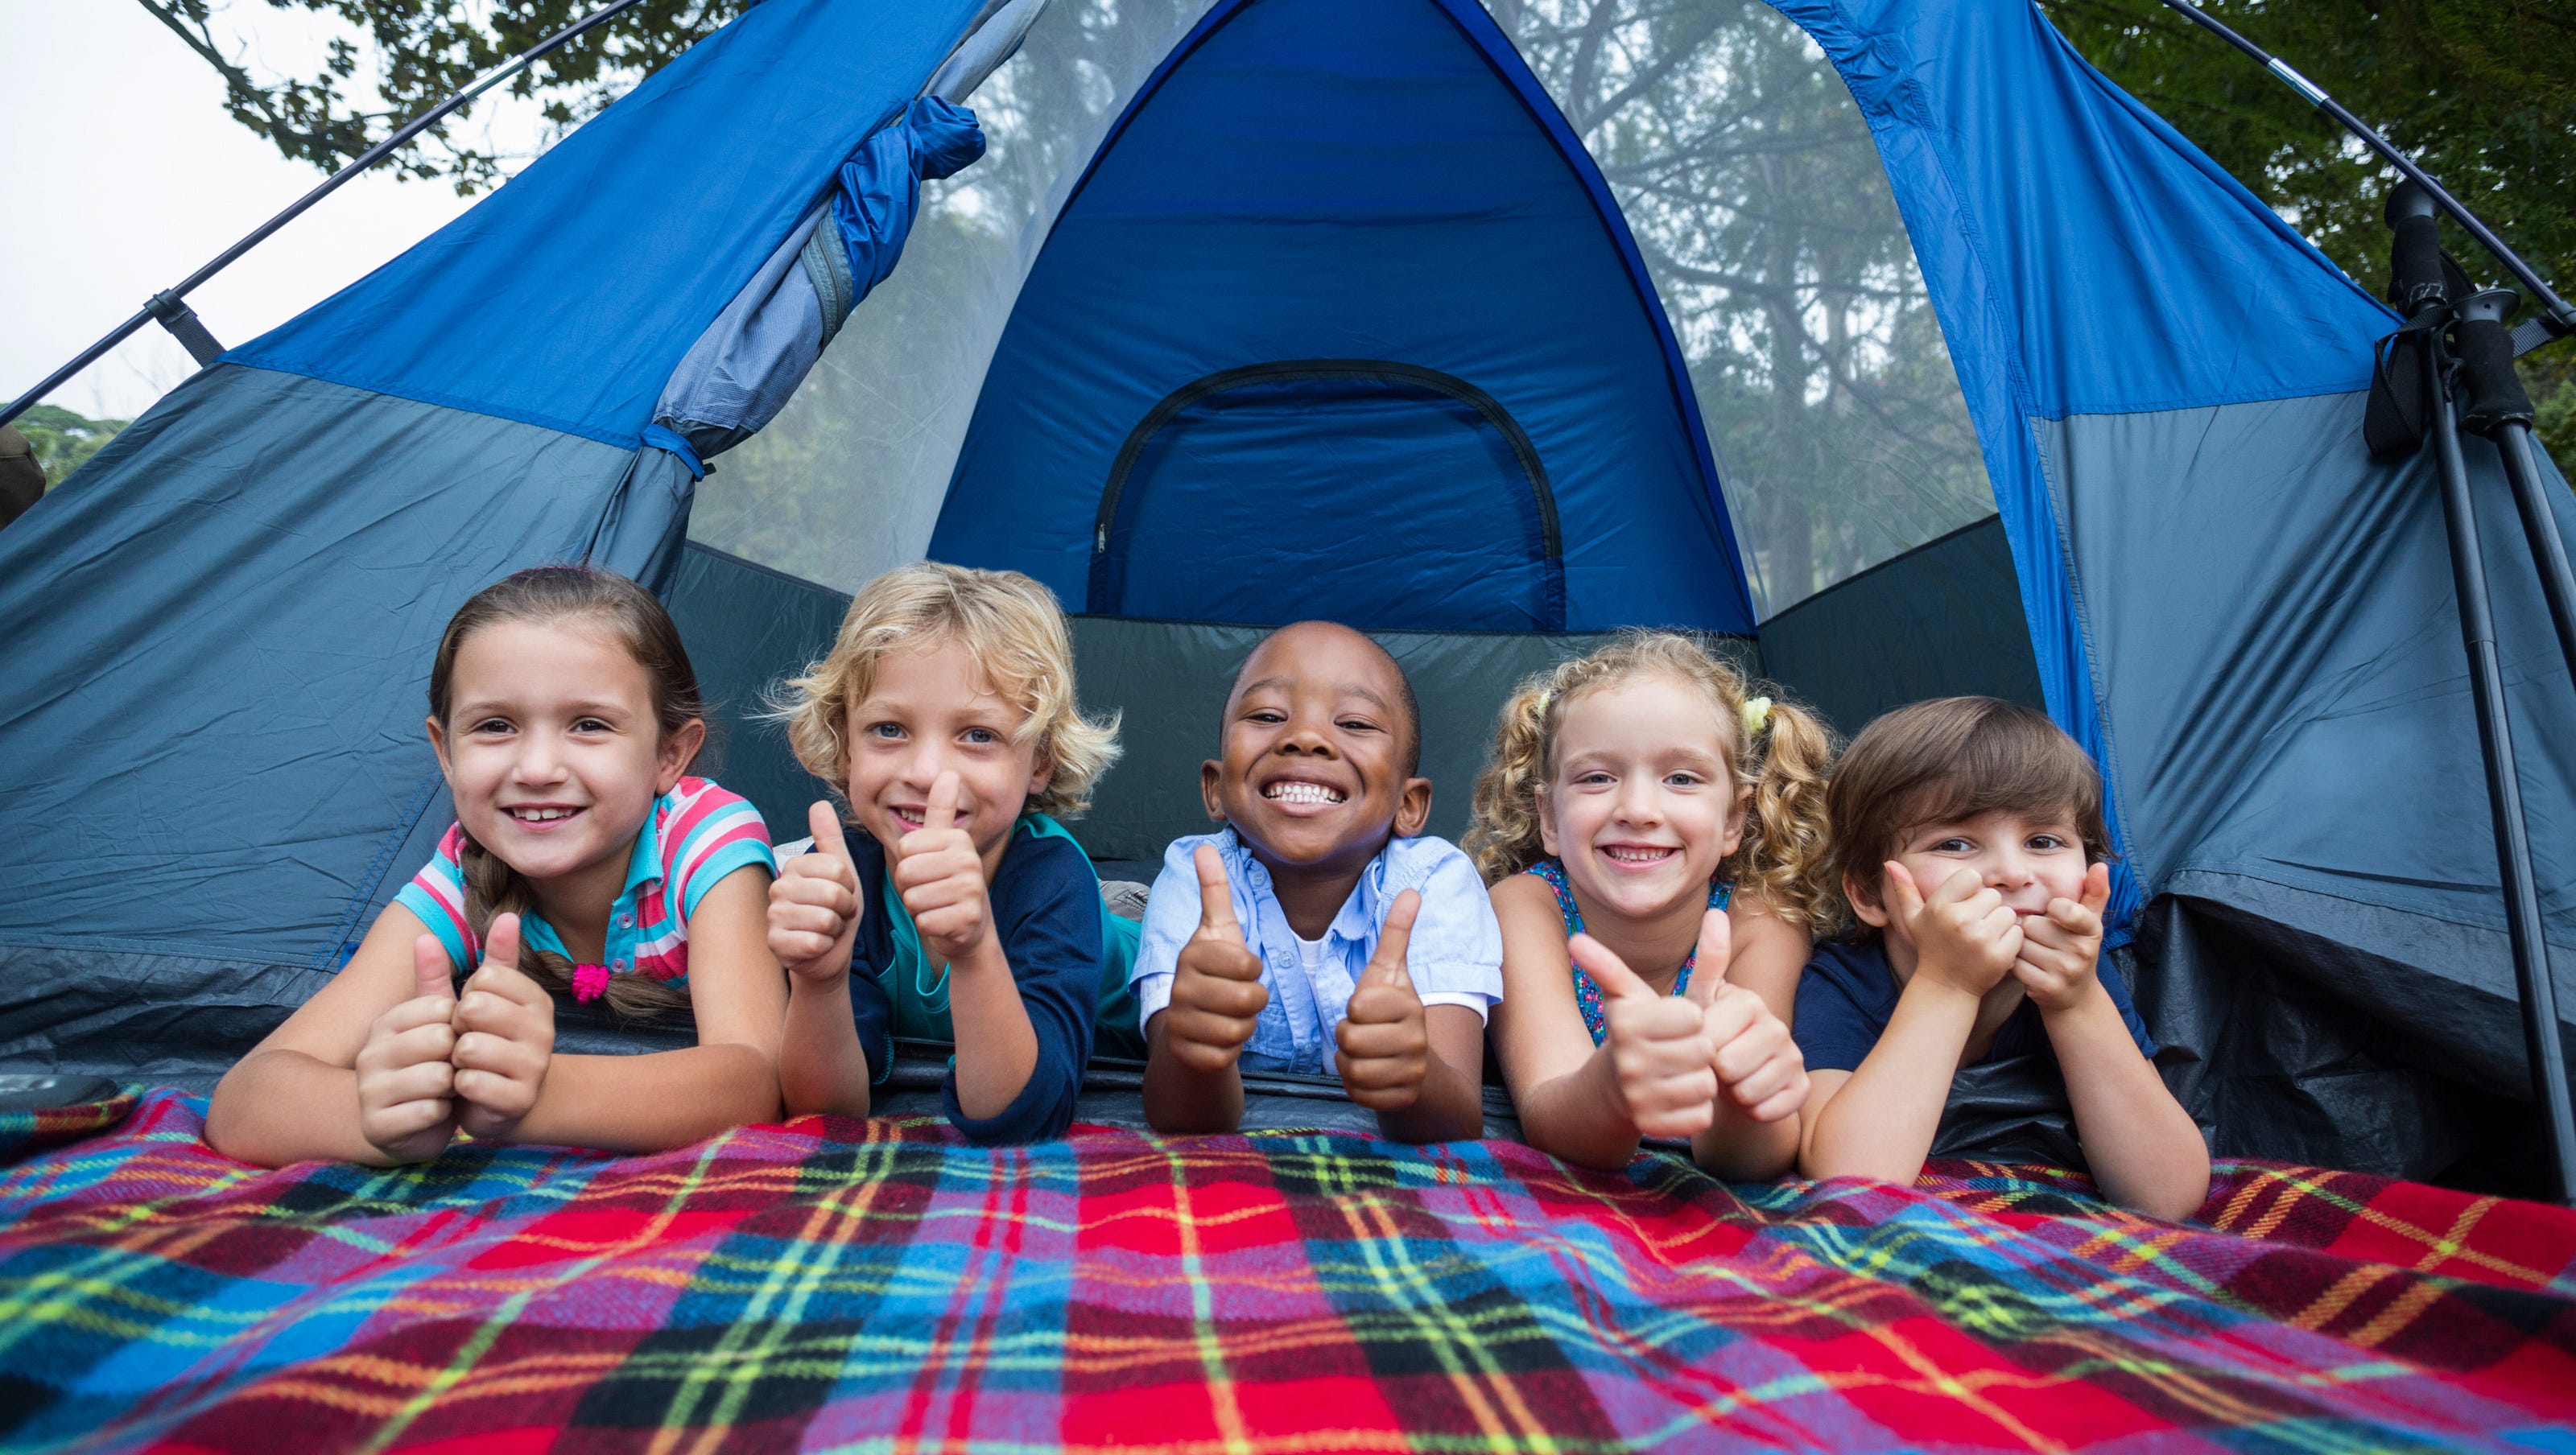 Top 10 family camping spots in Wisconsin